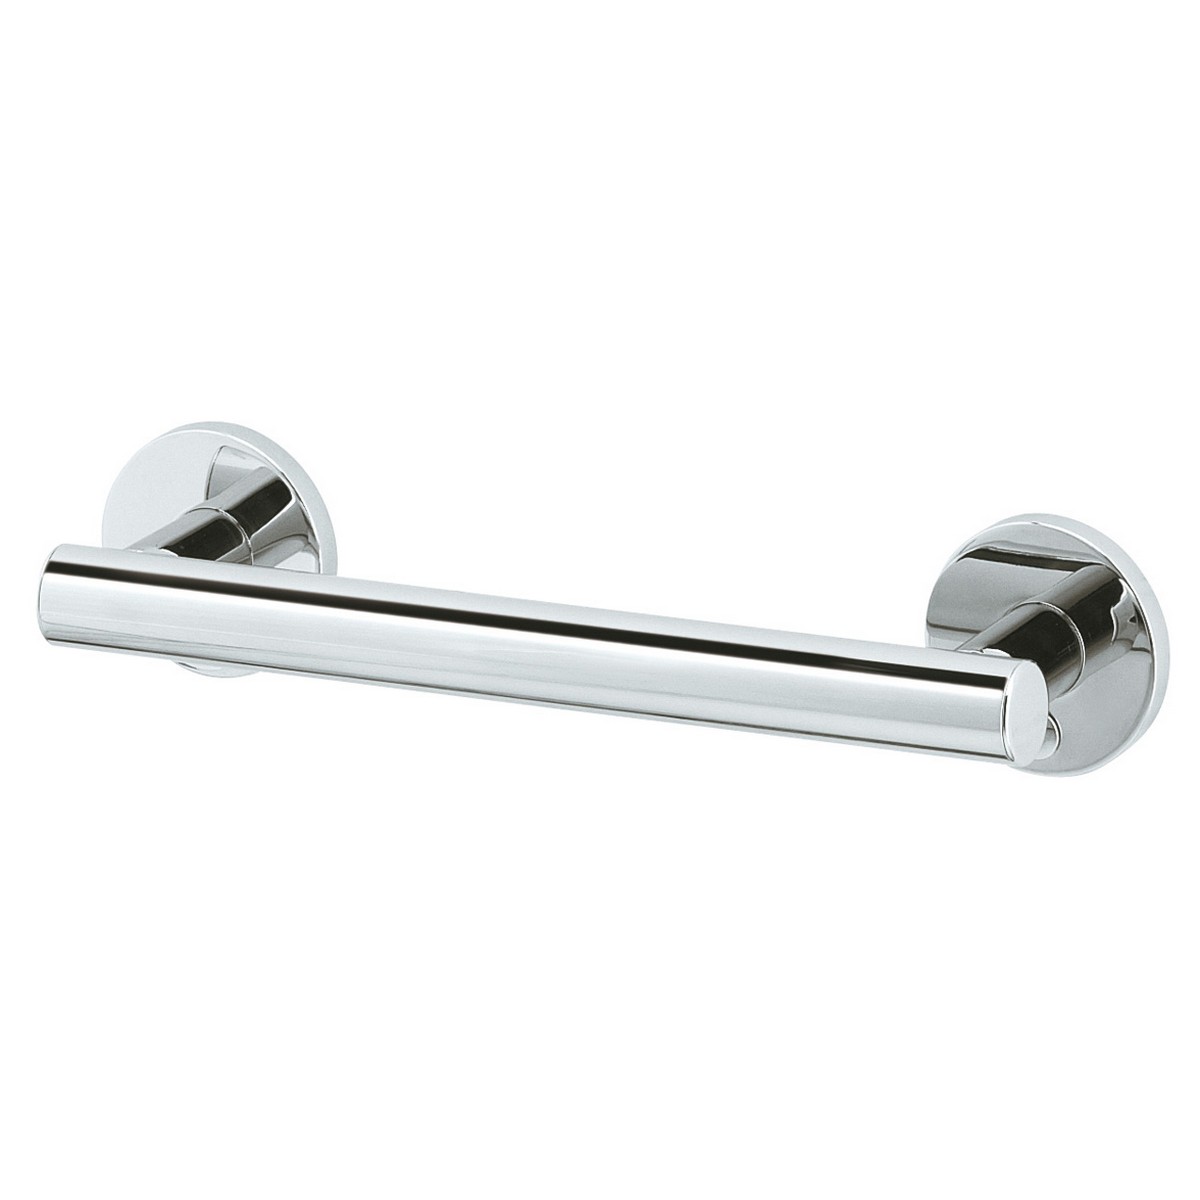 KEUCO 35901013000 PLAN CARE 30 INCH WALL MOUNTED SUPPORT RAIL IN POLISHED CHROME